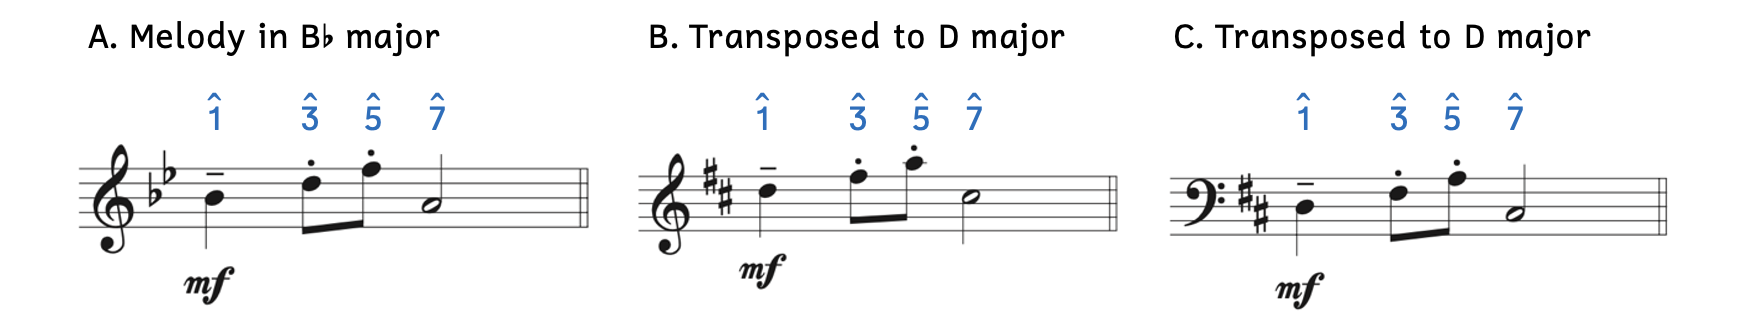 Steps to melodic transposition. Example A shows the melody in B-flat major. Example B shows the melody transposed up to D major. Example C shows the melody transposed down to D major.